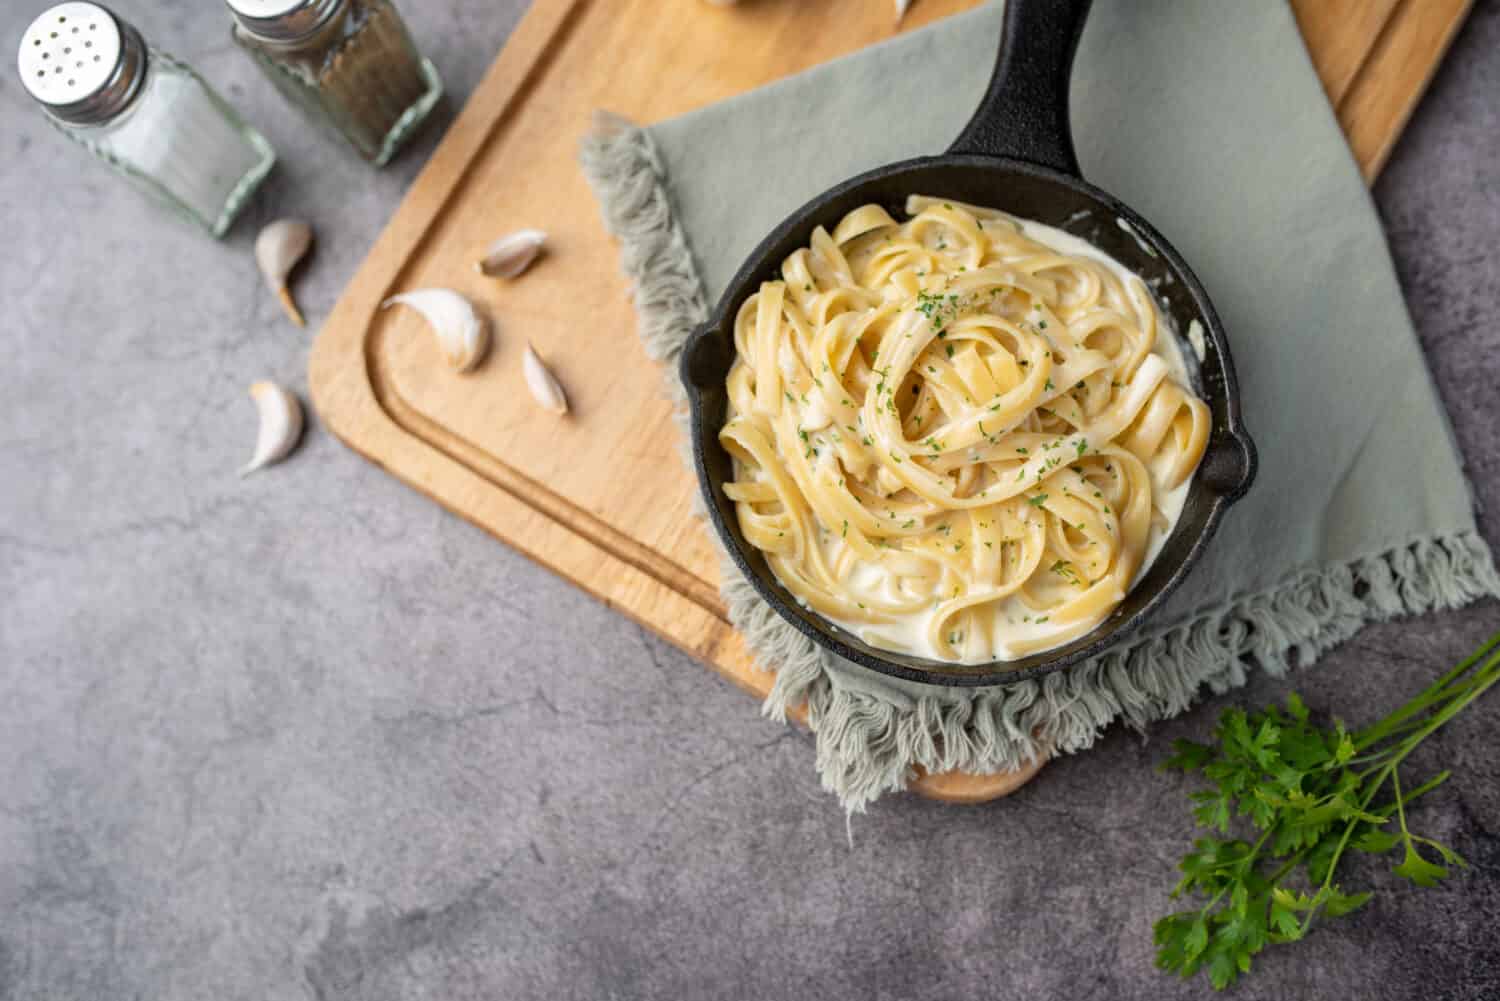 Alfredo pasta dinner with creamy white sauce and herbs